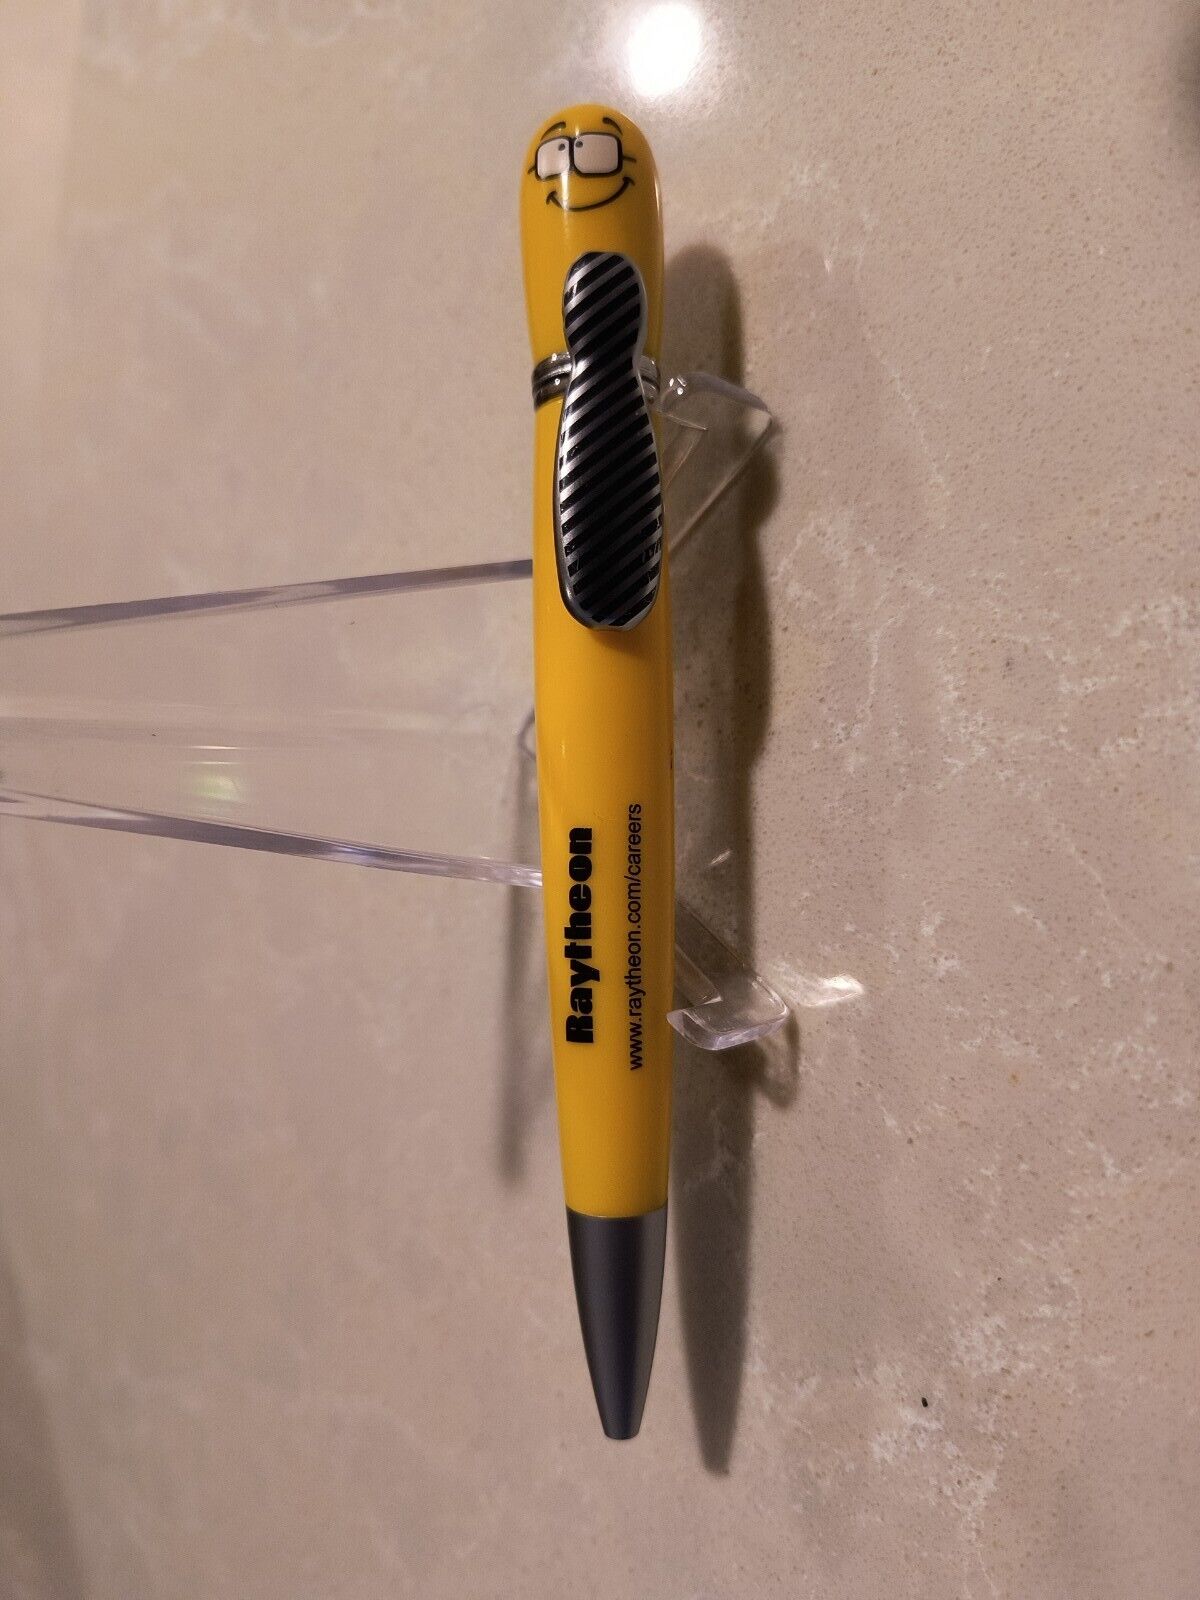 RAYTHEON PEN with black ink, takes standard refills.